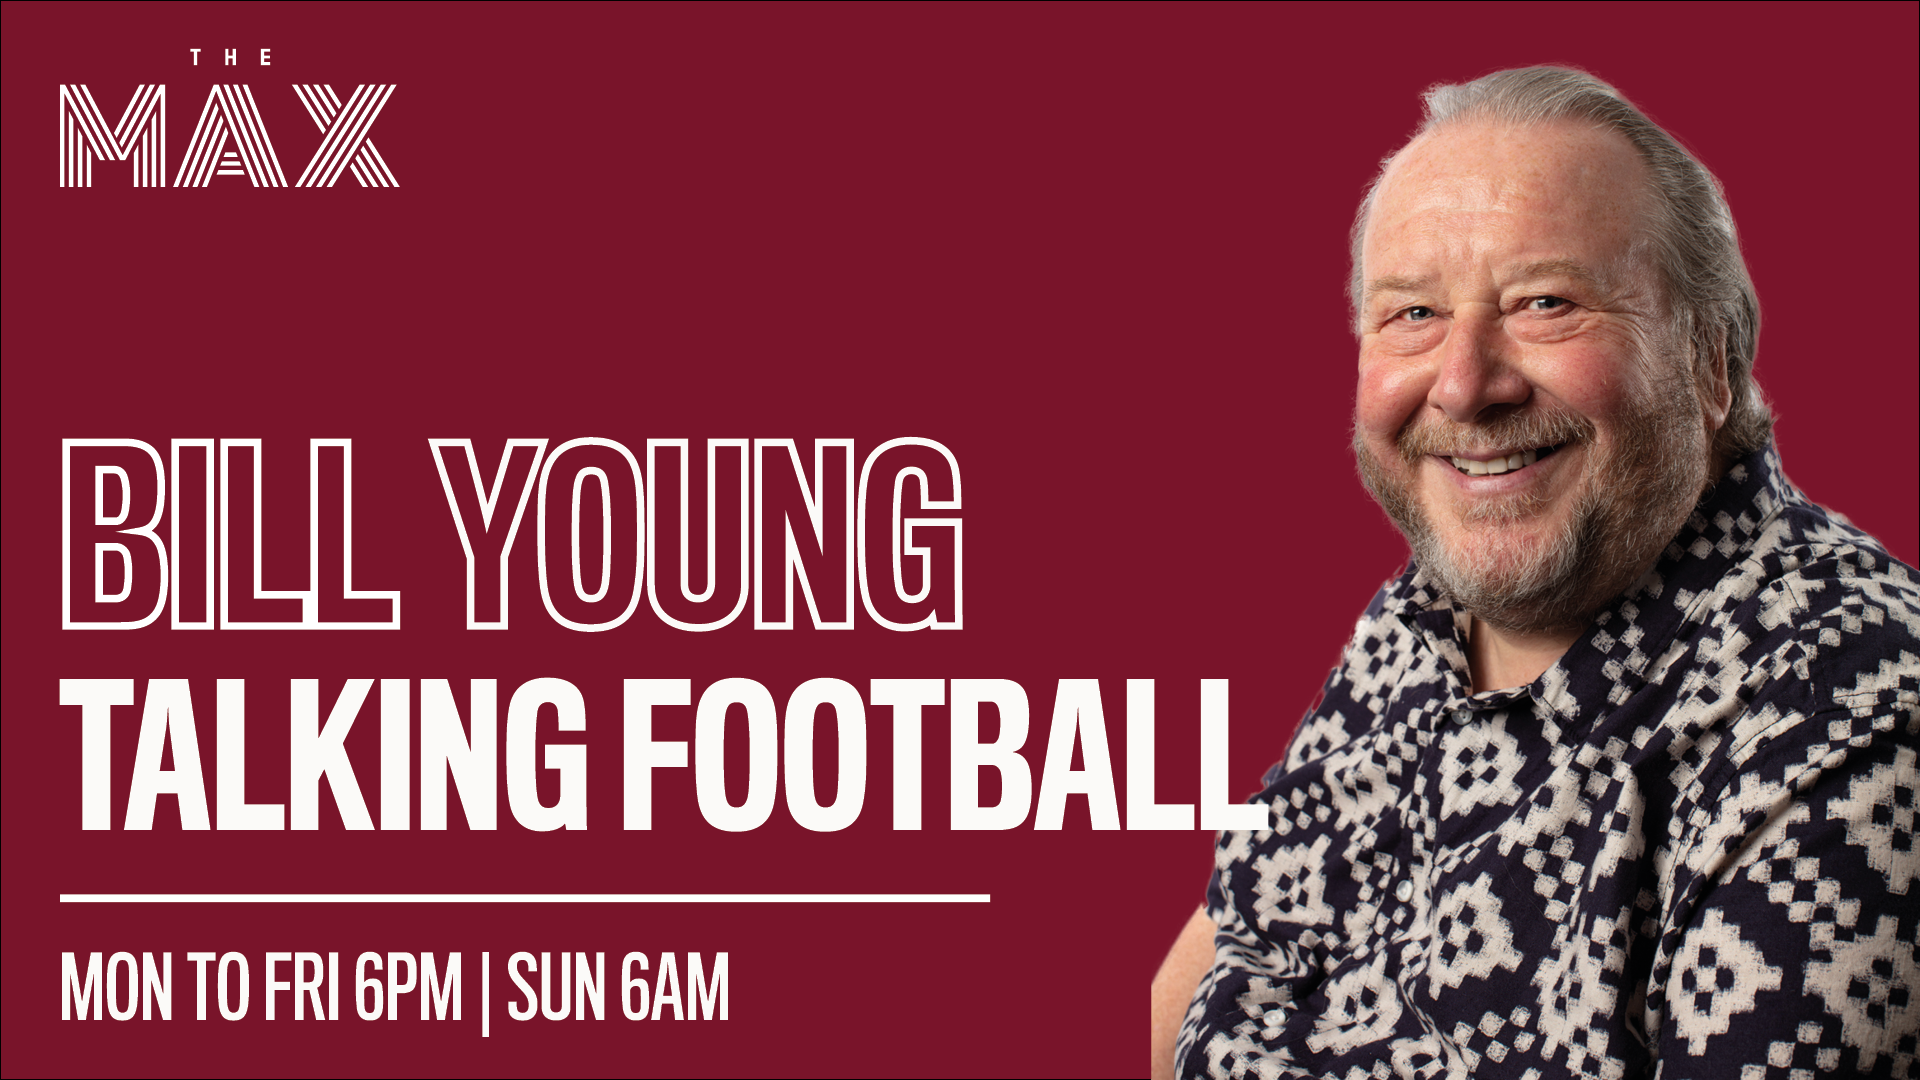 Talking Football with Bill Young - Monday 26th April